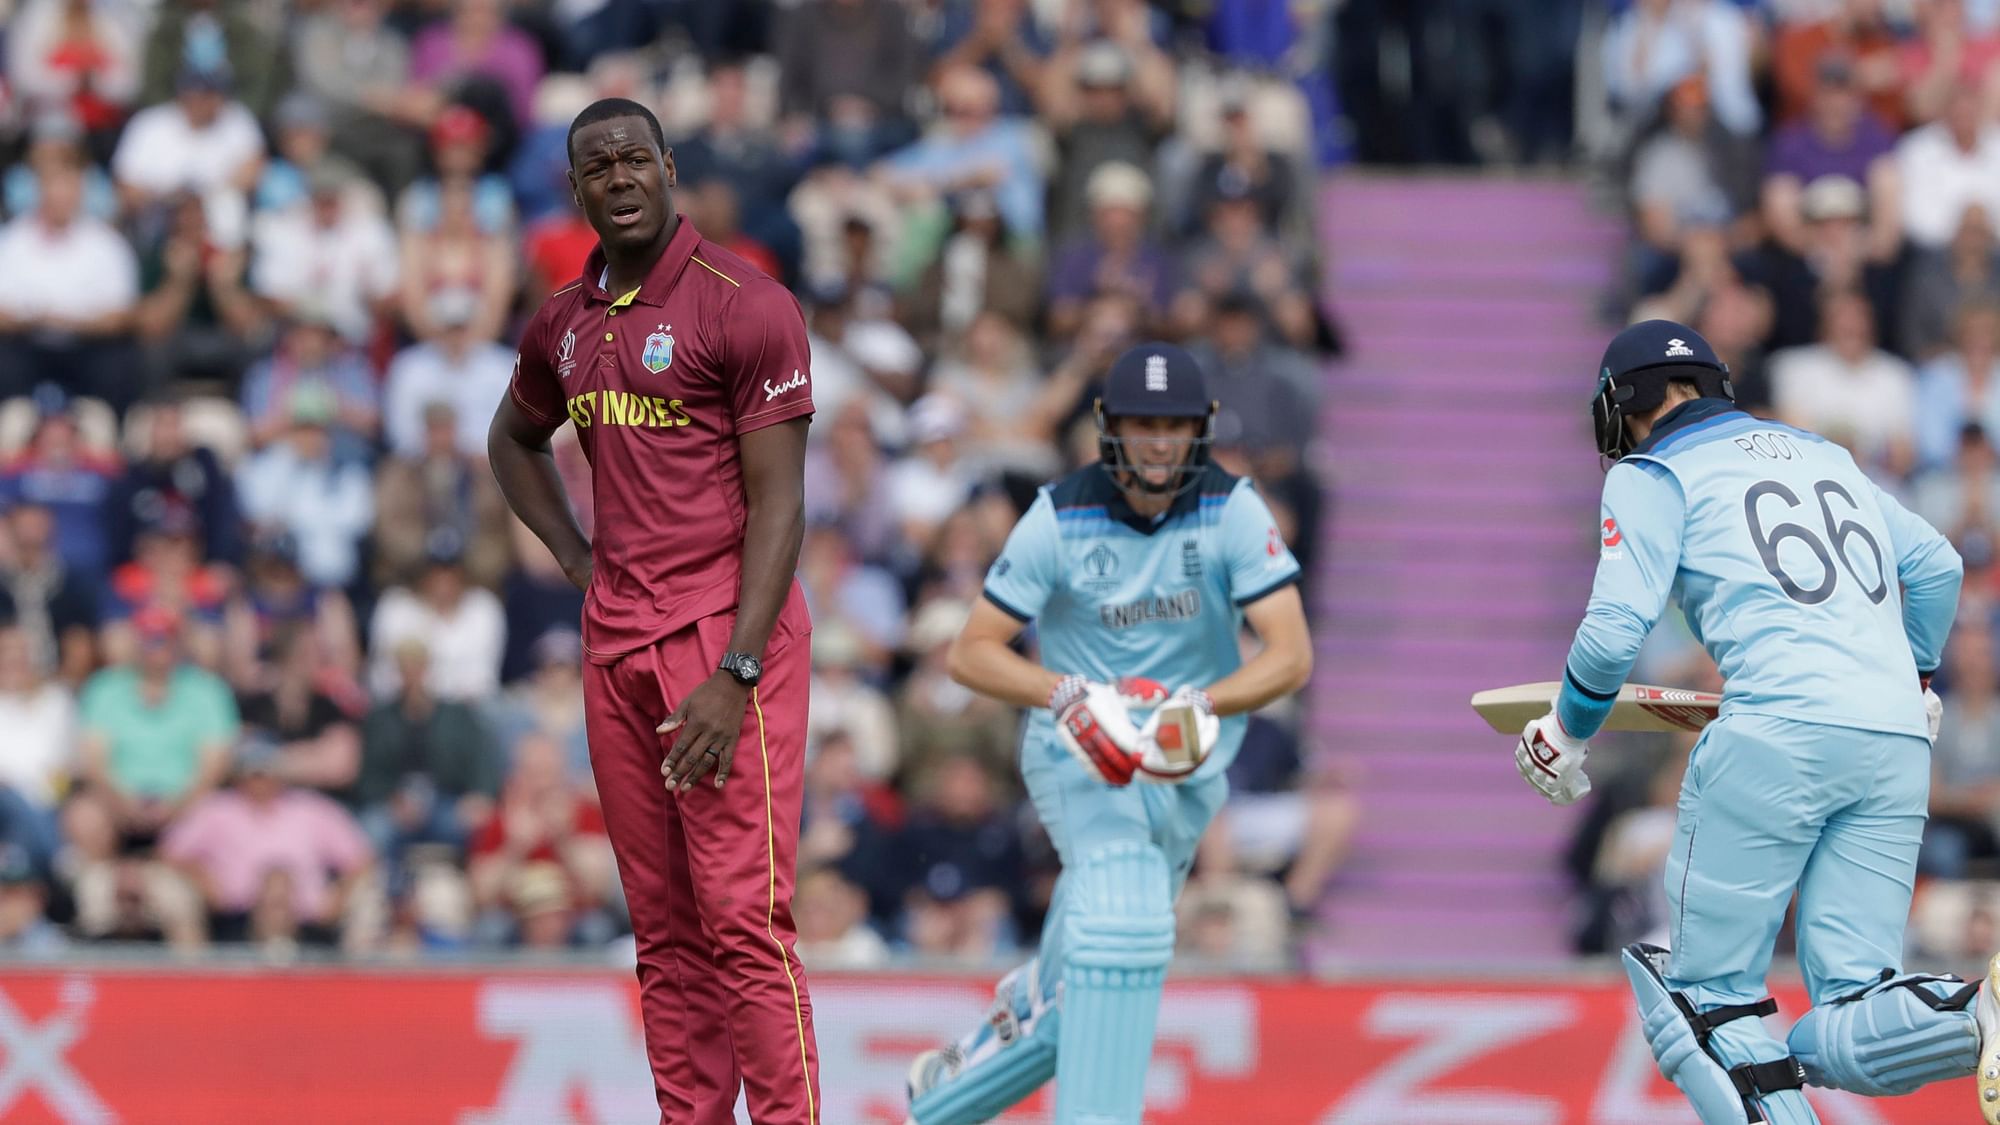 West Indies’ Carlos Brathwaite during the Cricket World Cup match between England and West Indies on 14 June.